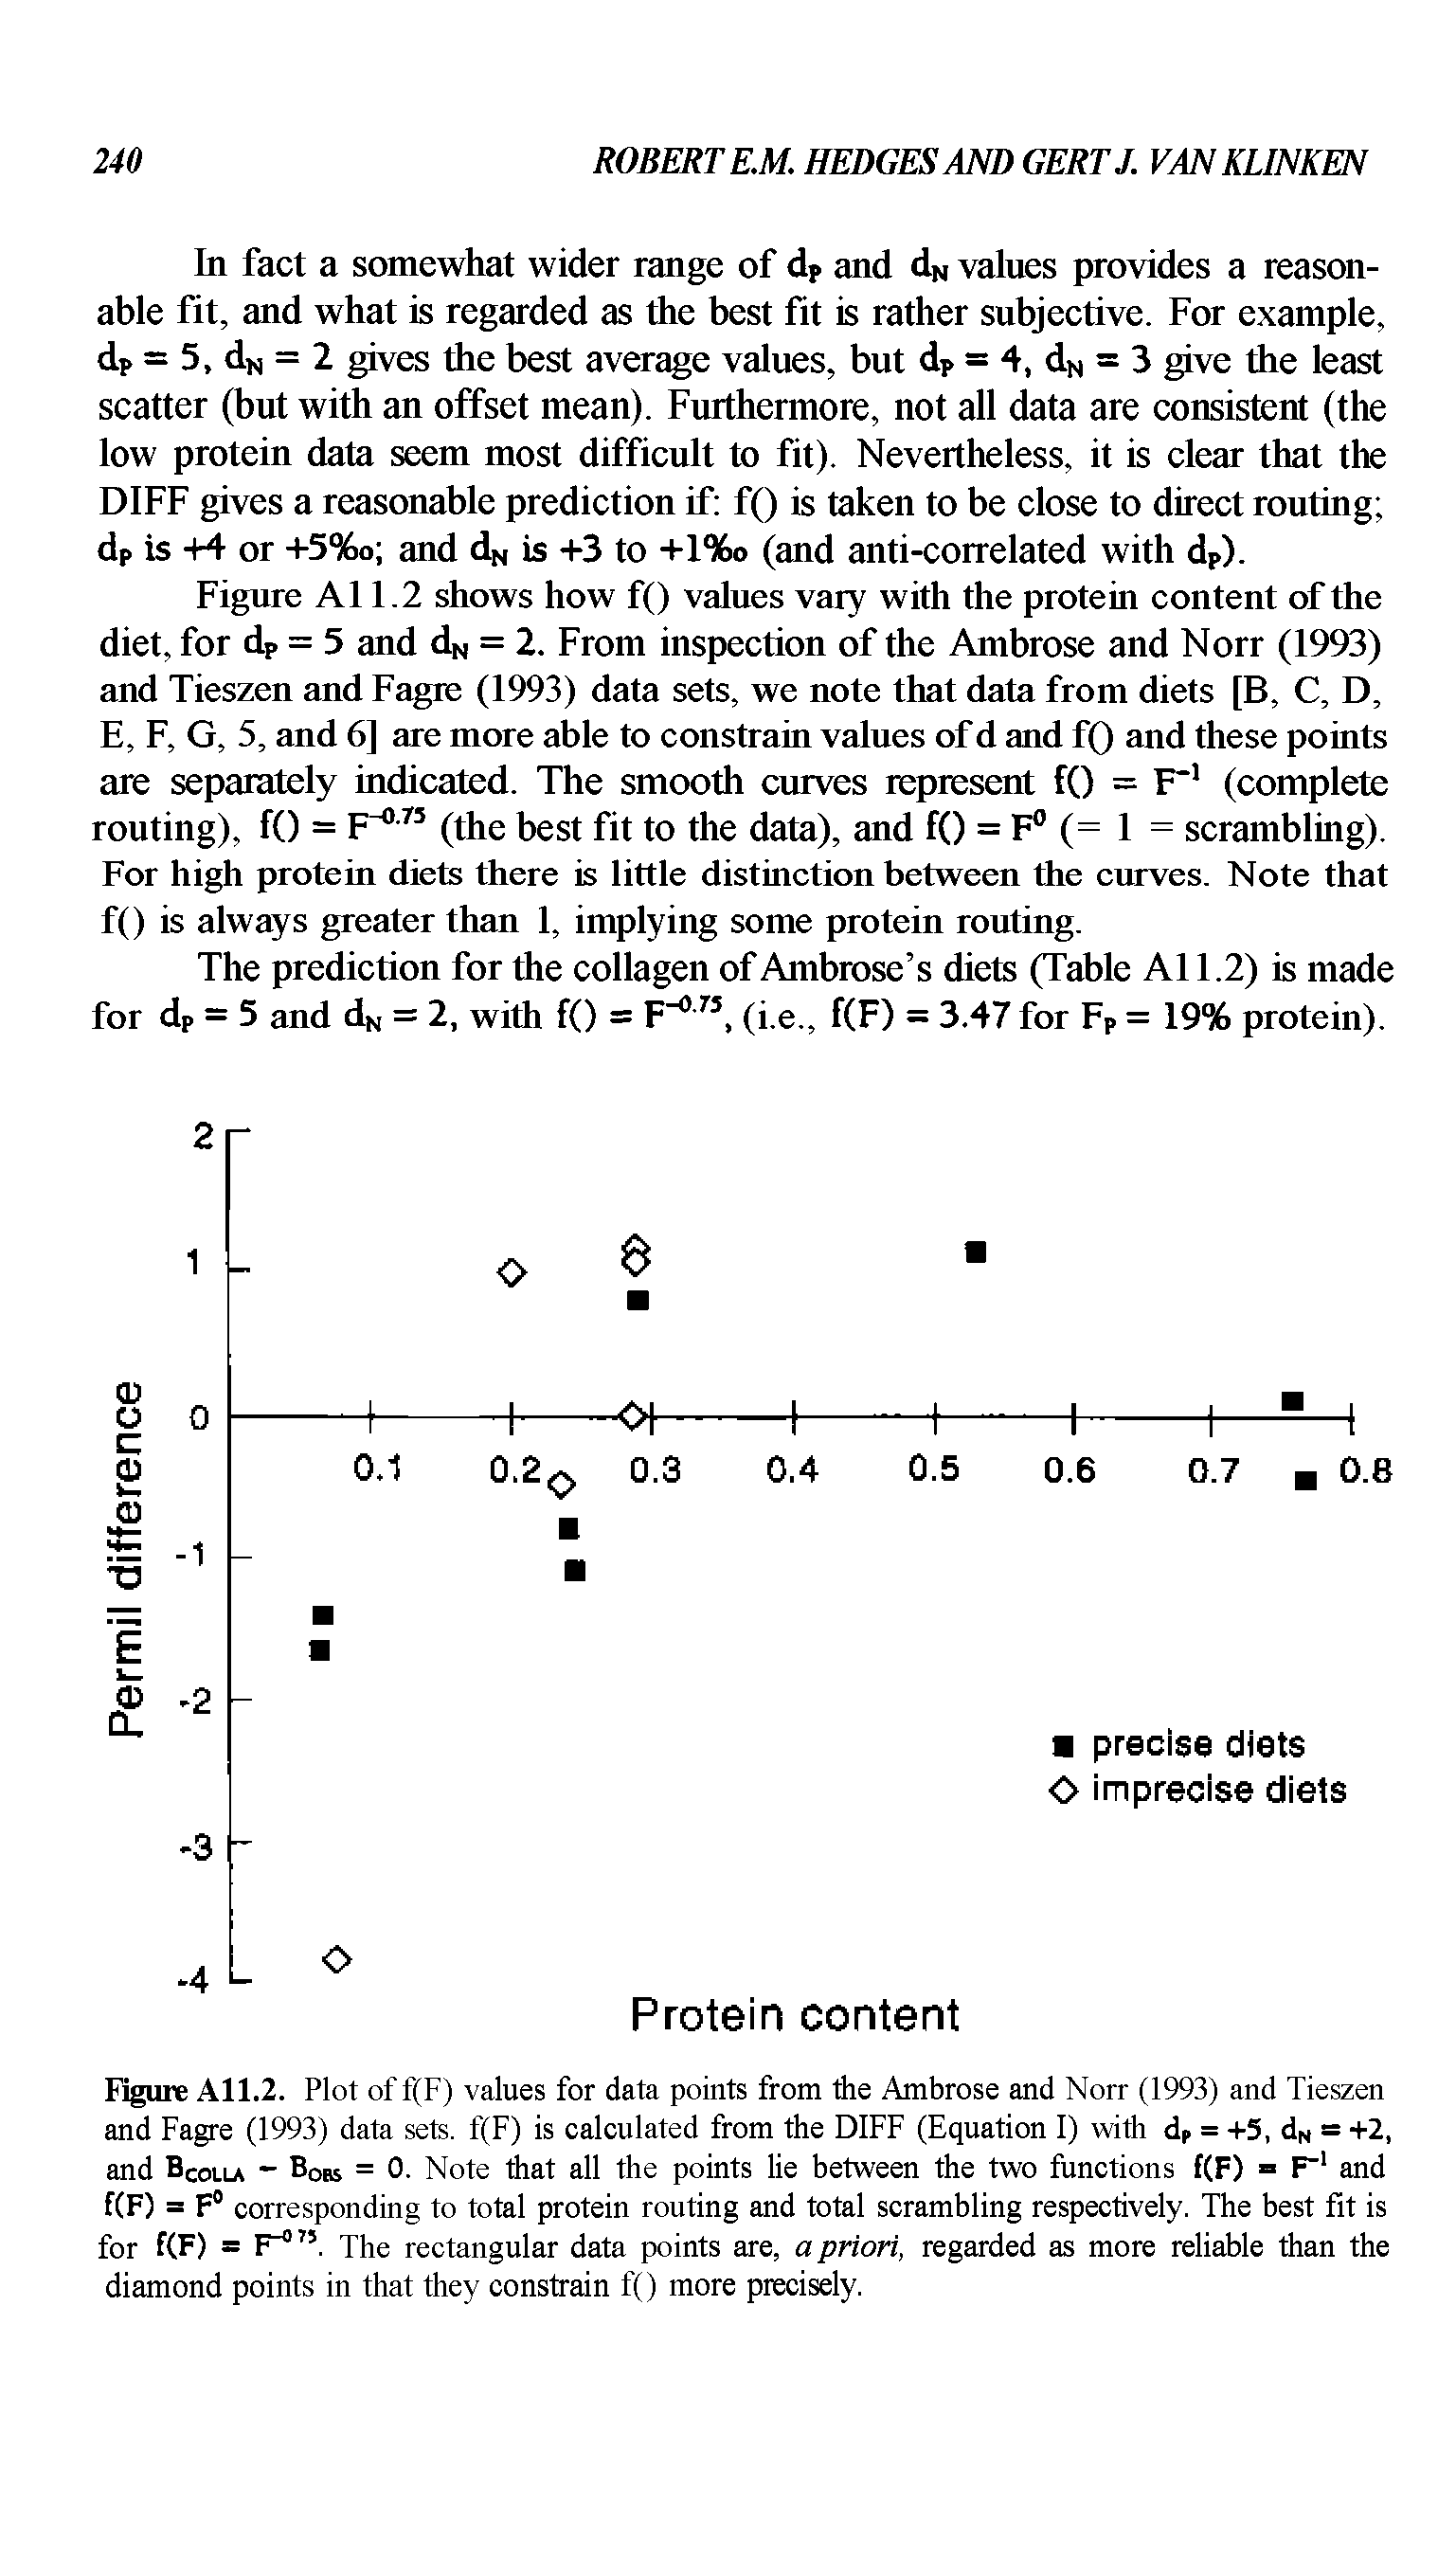 Figure A11.2. Plot of f(F) values for data points from the Ambrose and Norr (1993) and Tieszen and Fagre (1993) data sets. f(F) is calculated from the DIFF (Equation I) with dp = +3, dpi = +2, and Bcolla - Bobs = 0. Note that all the points lie between the two functions f(F) = F and f(F) = F° corresponding to total protein routing and total scrambling respectively. The best fit is for f(F) = F The rectangular data points are, a priori, regarded as more reliable than the diamond points in that they constrain f() more precisely.